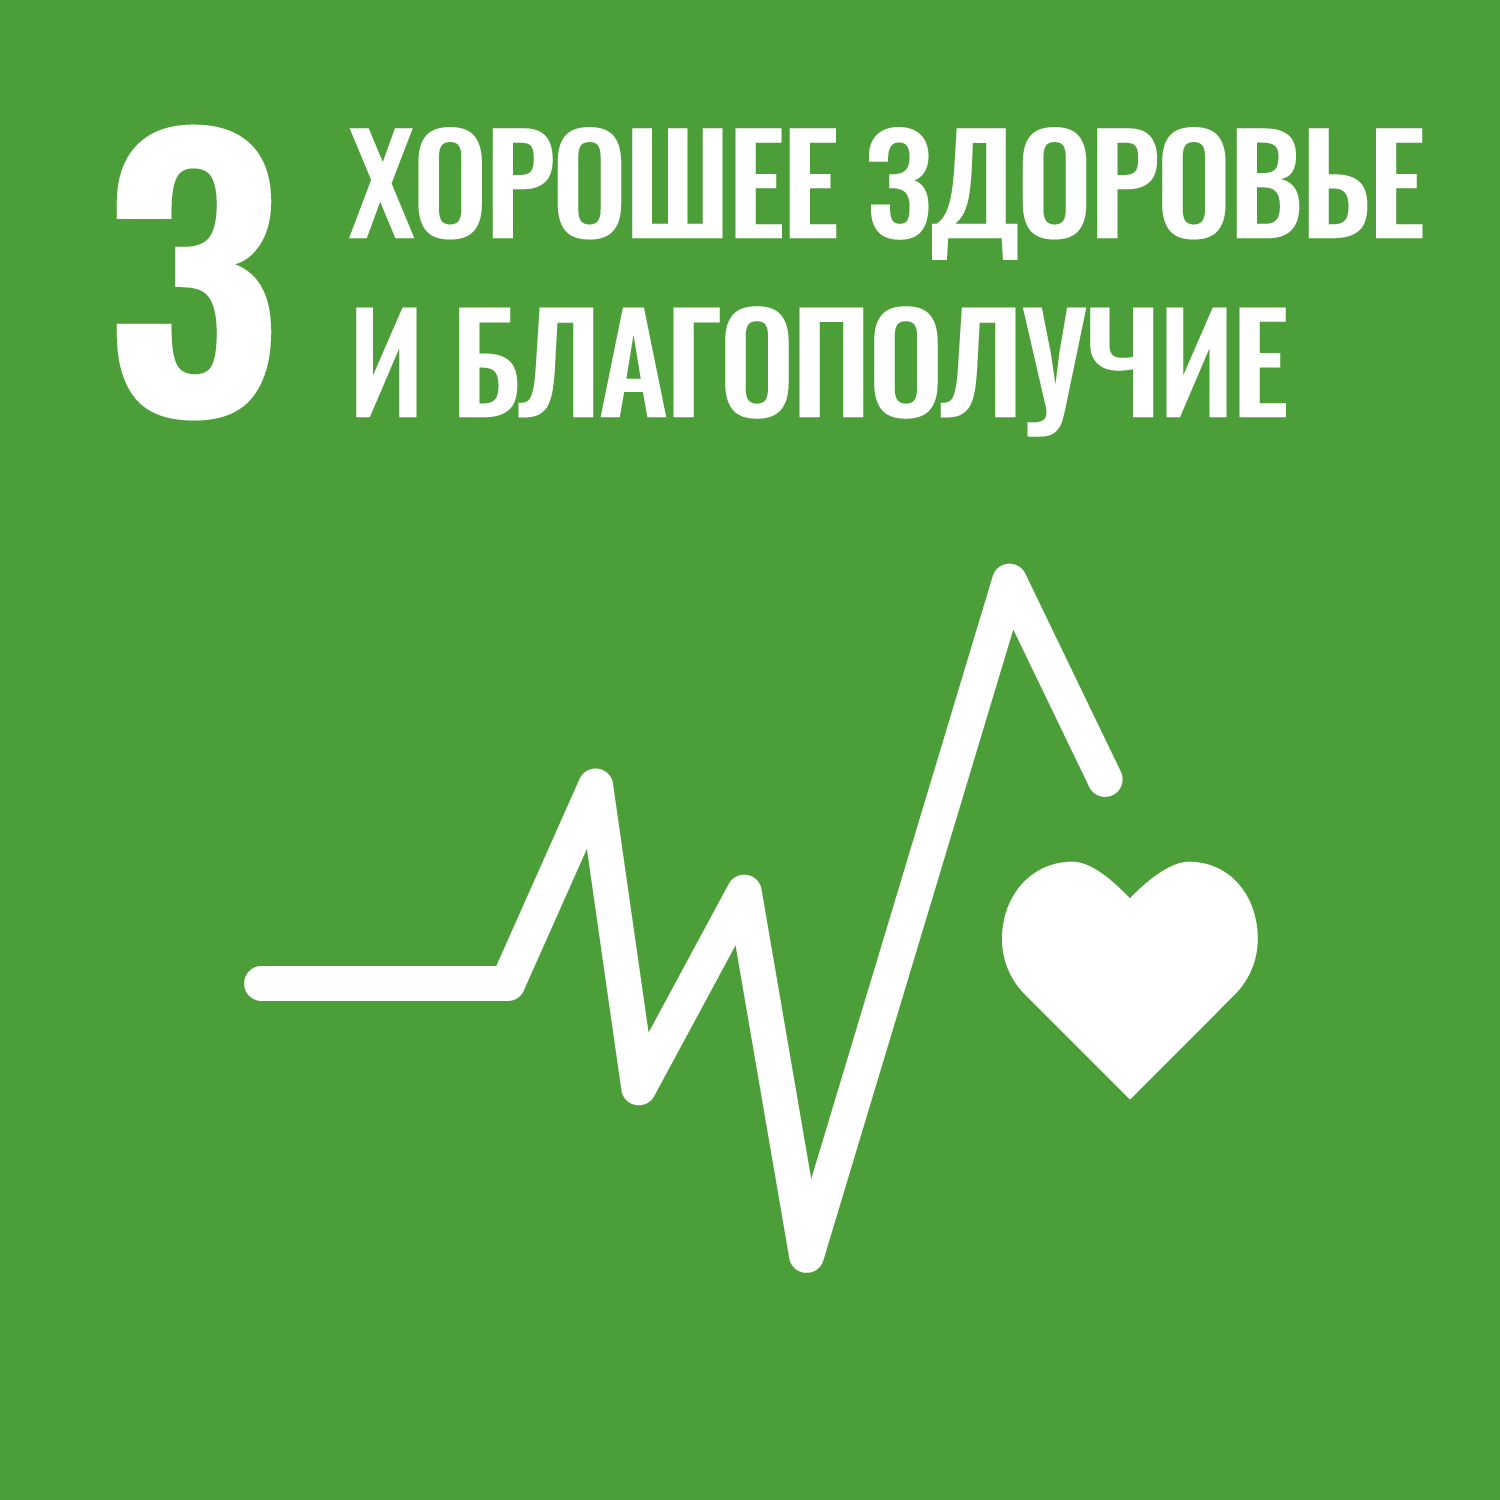 3 - GOOD HEALTH AND WELL-BEING